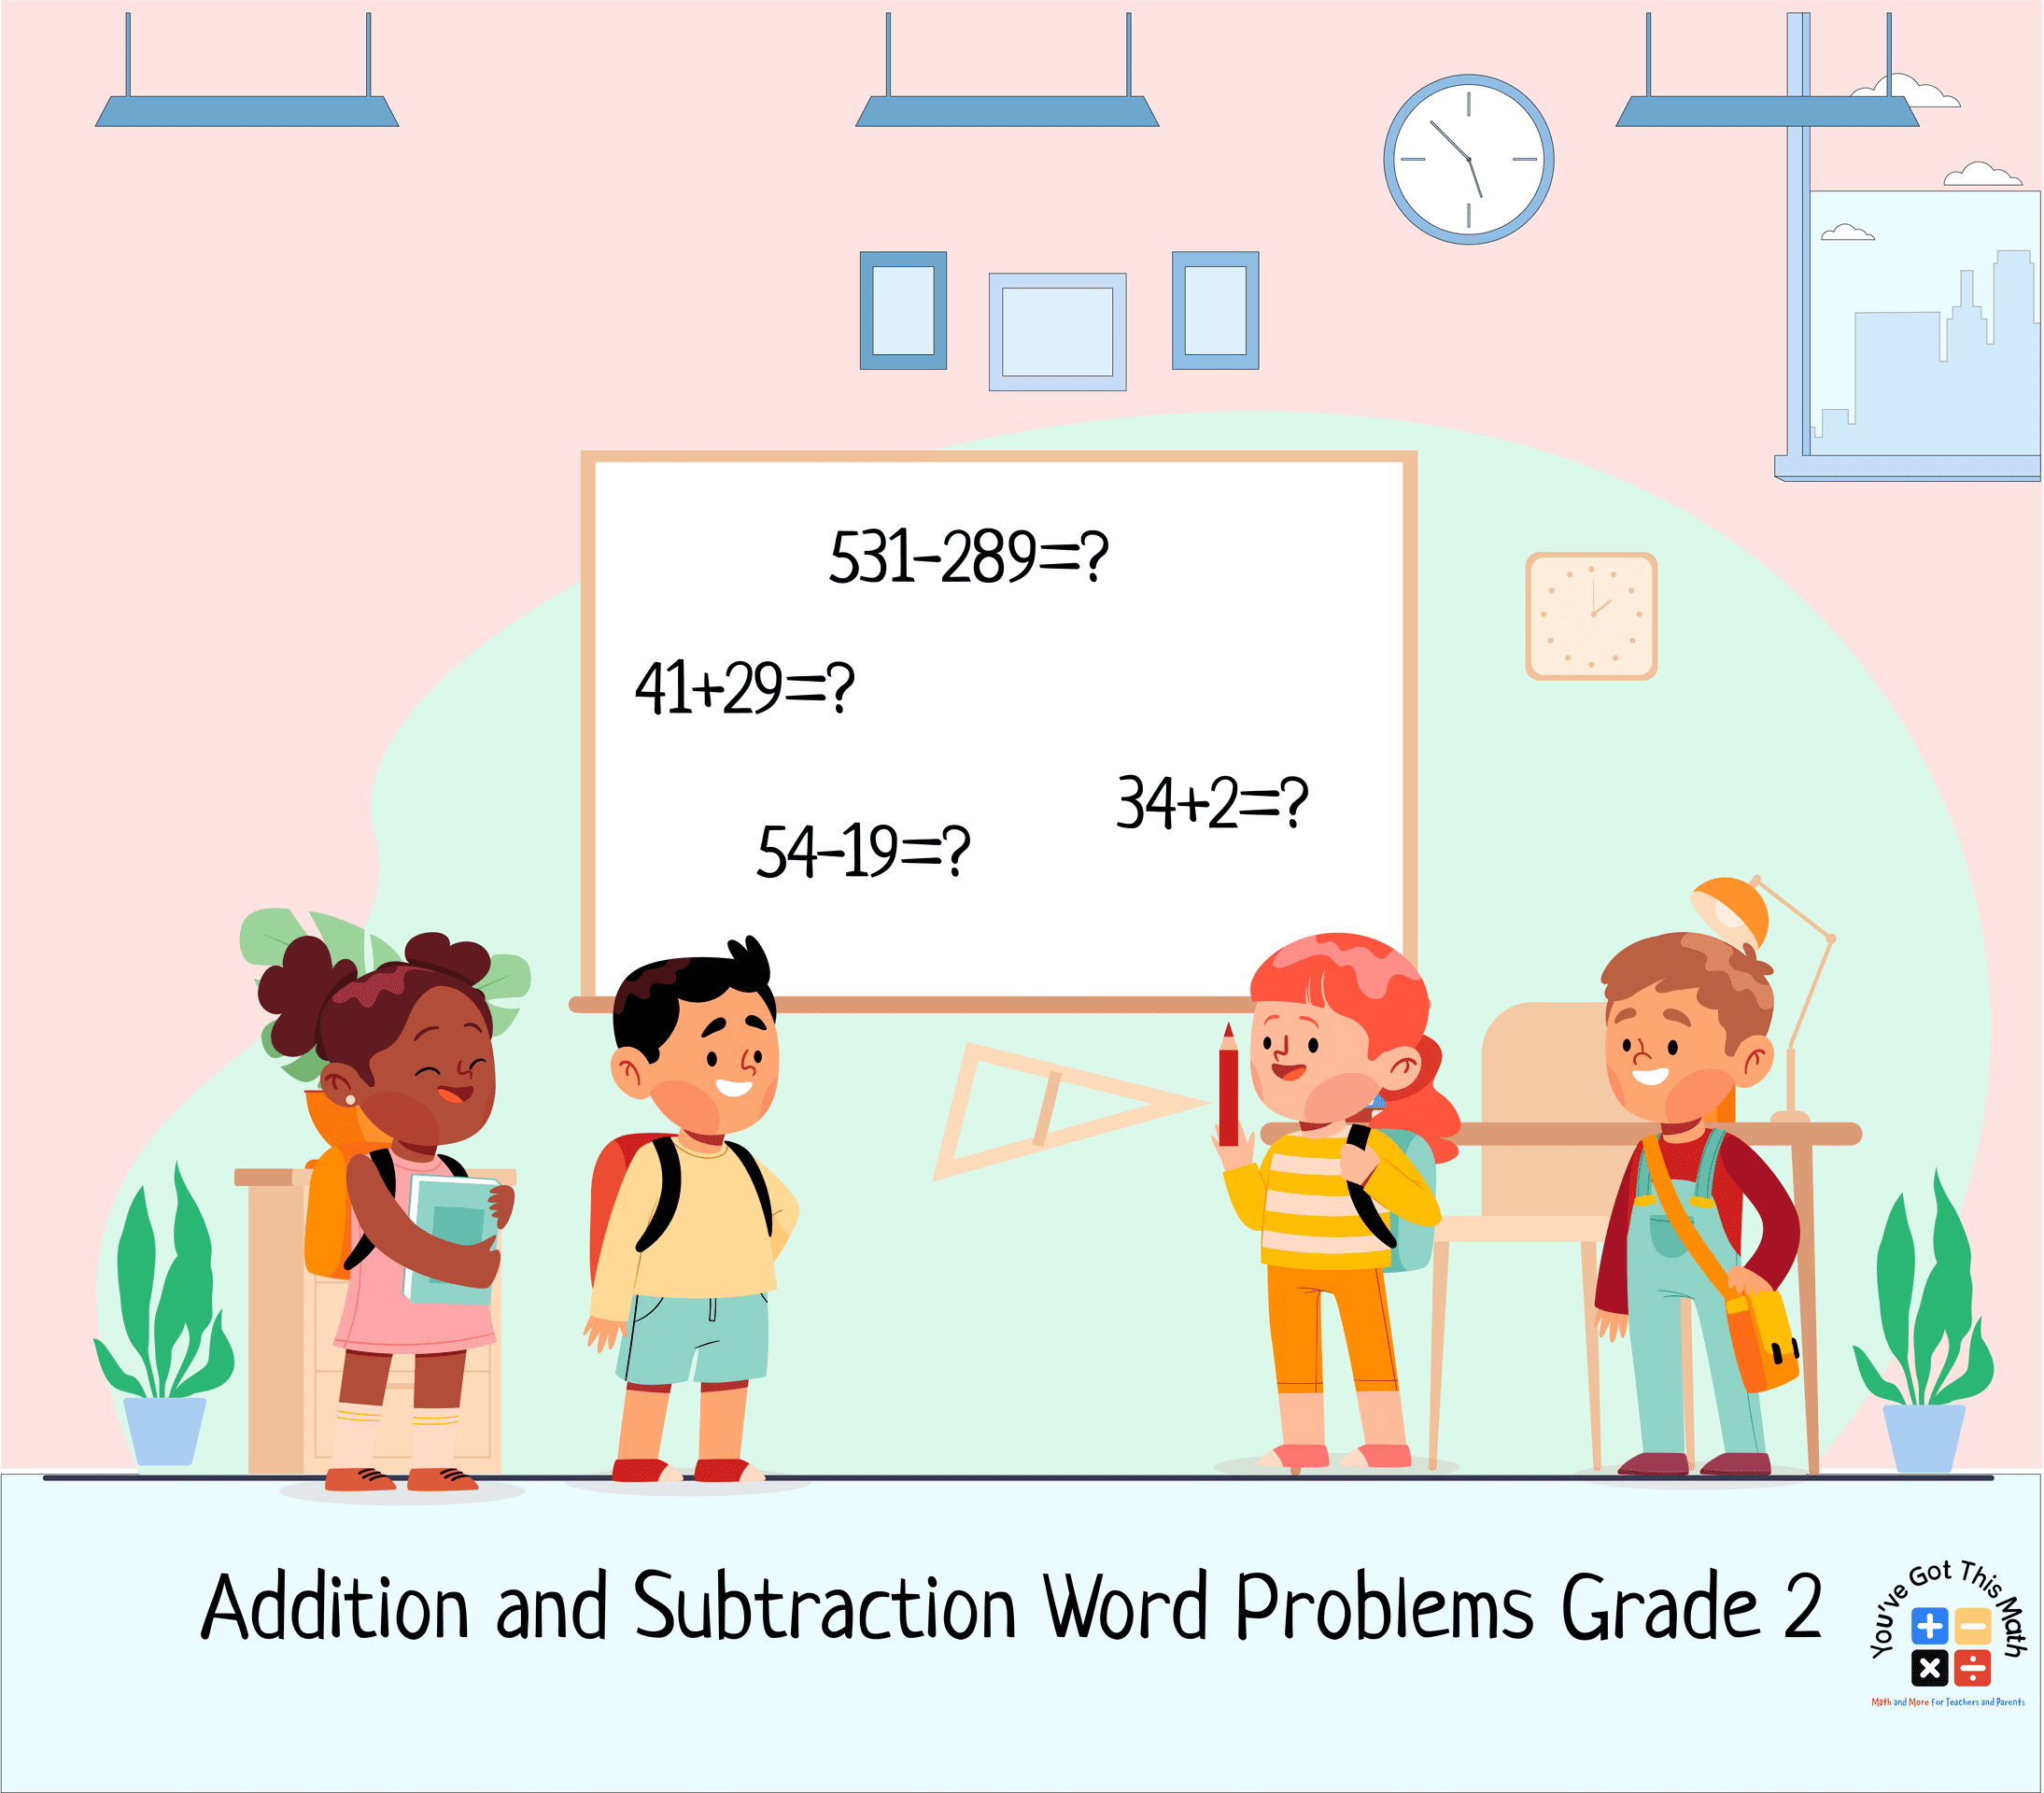 Addition and Subtraction Word Problems Grade 2 overview